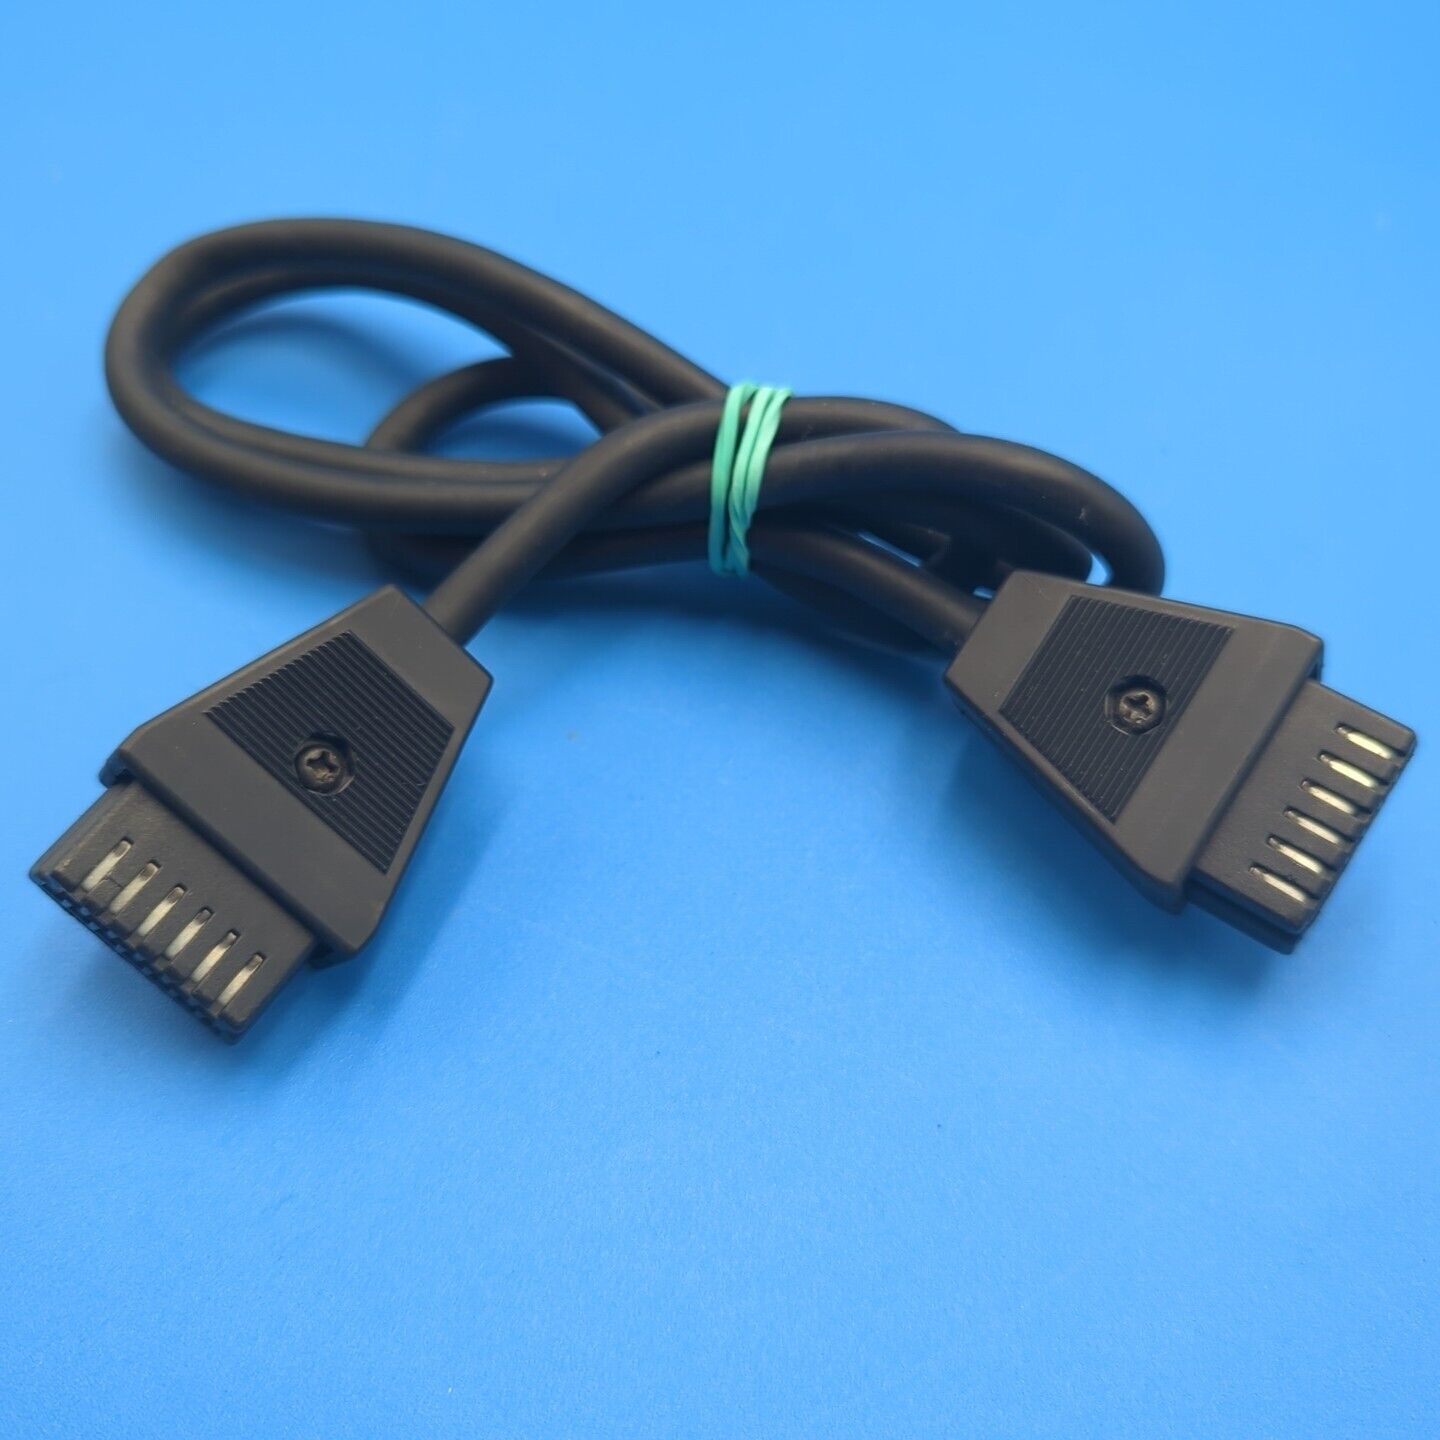 SIO serial interface cable 6 ft for Atari 400 800 XL XE Vintage Computer